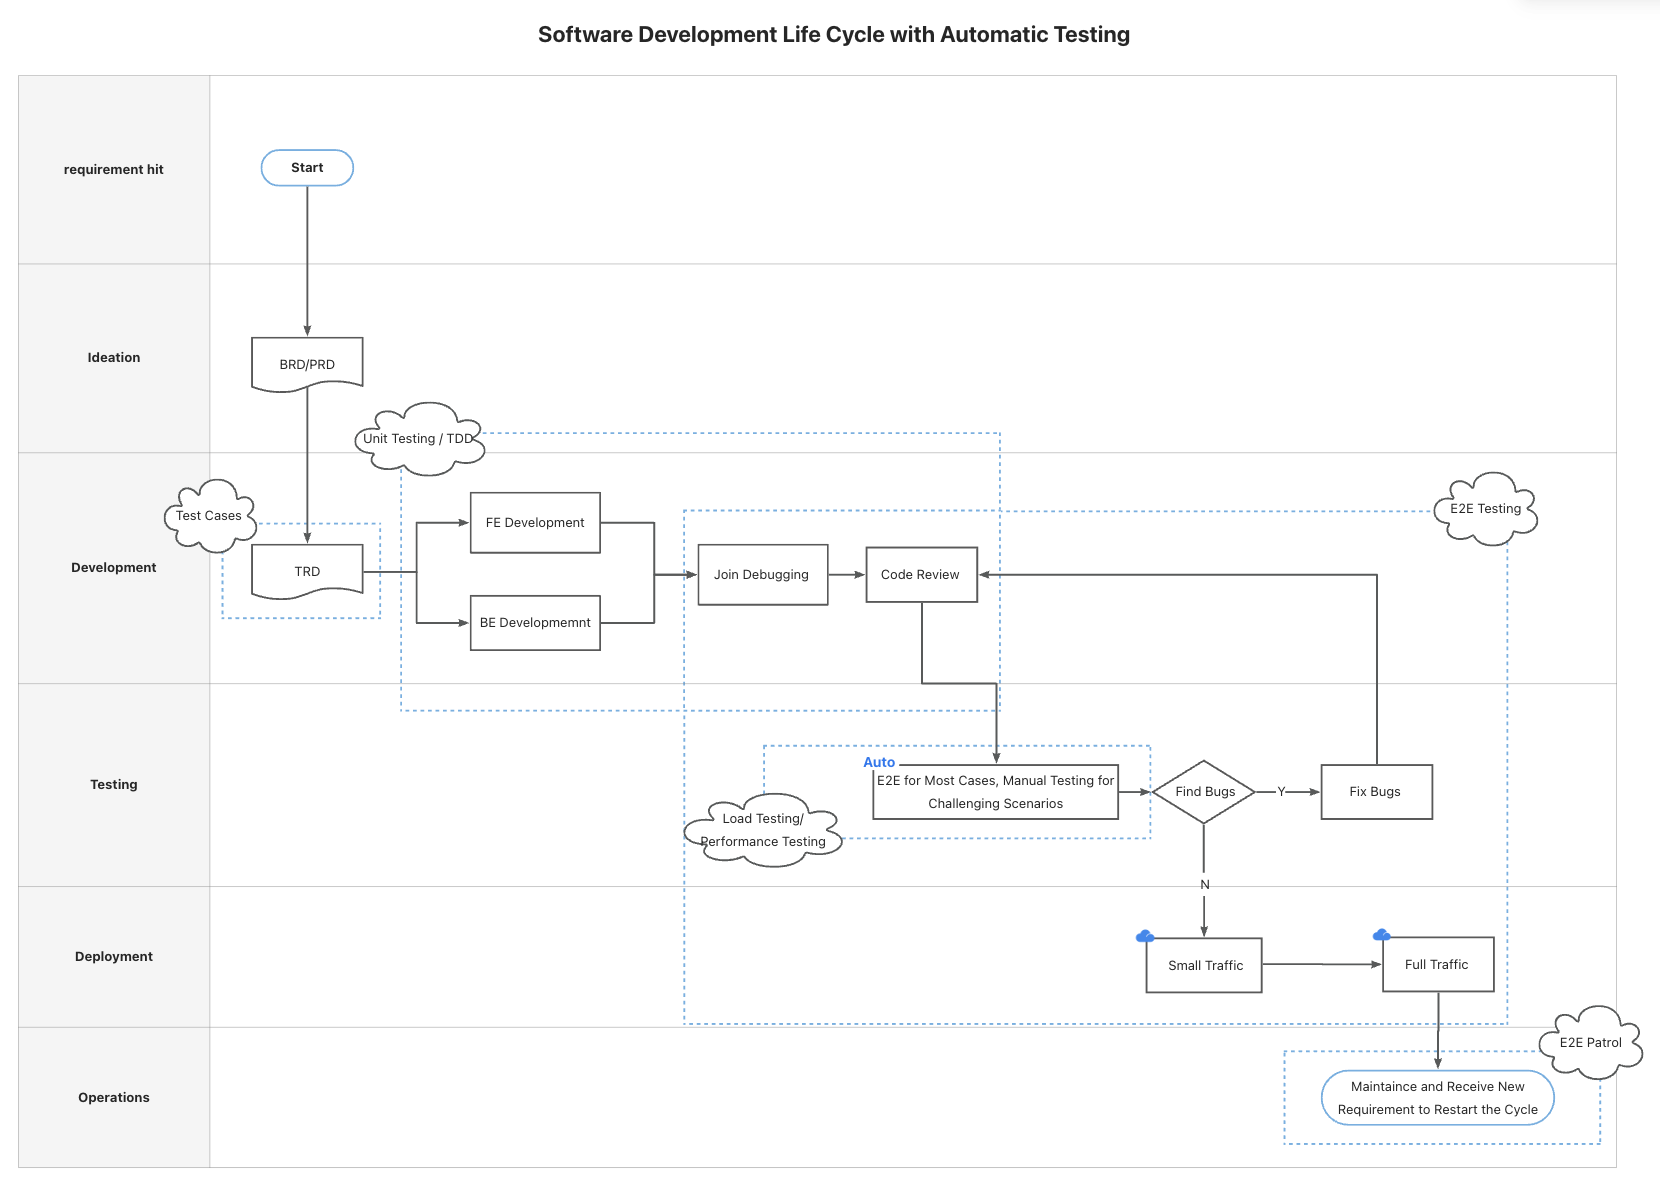 Software Development Life Cycle with Automatic Testing